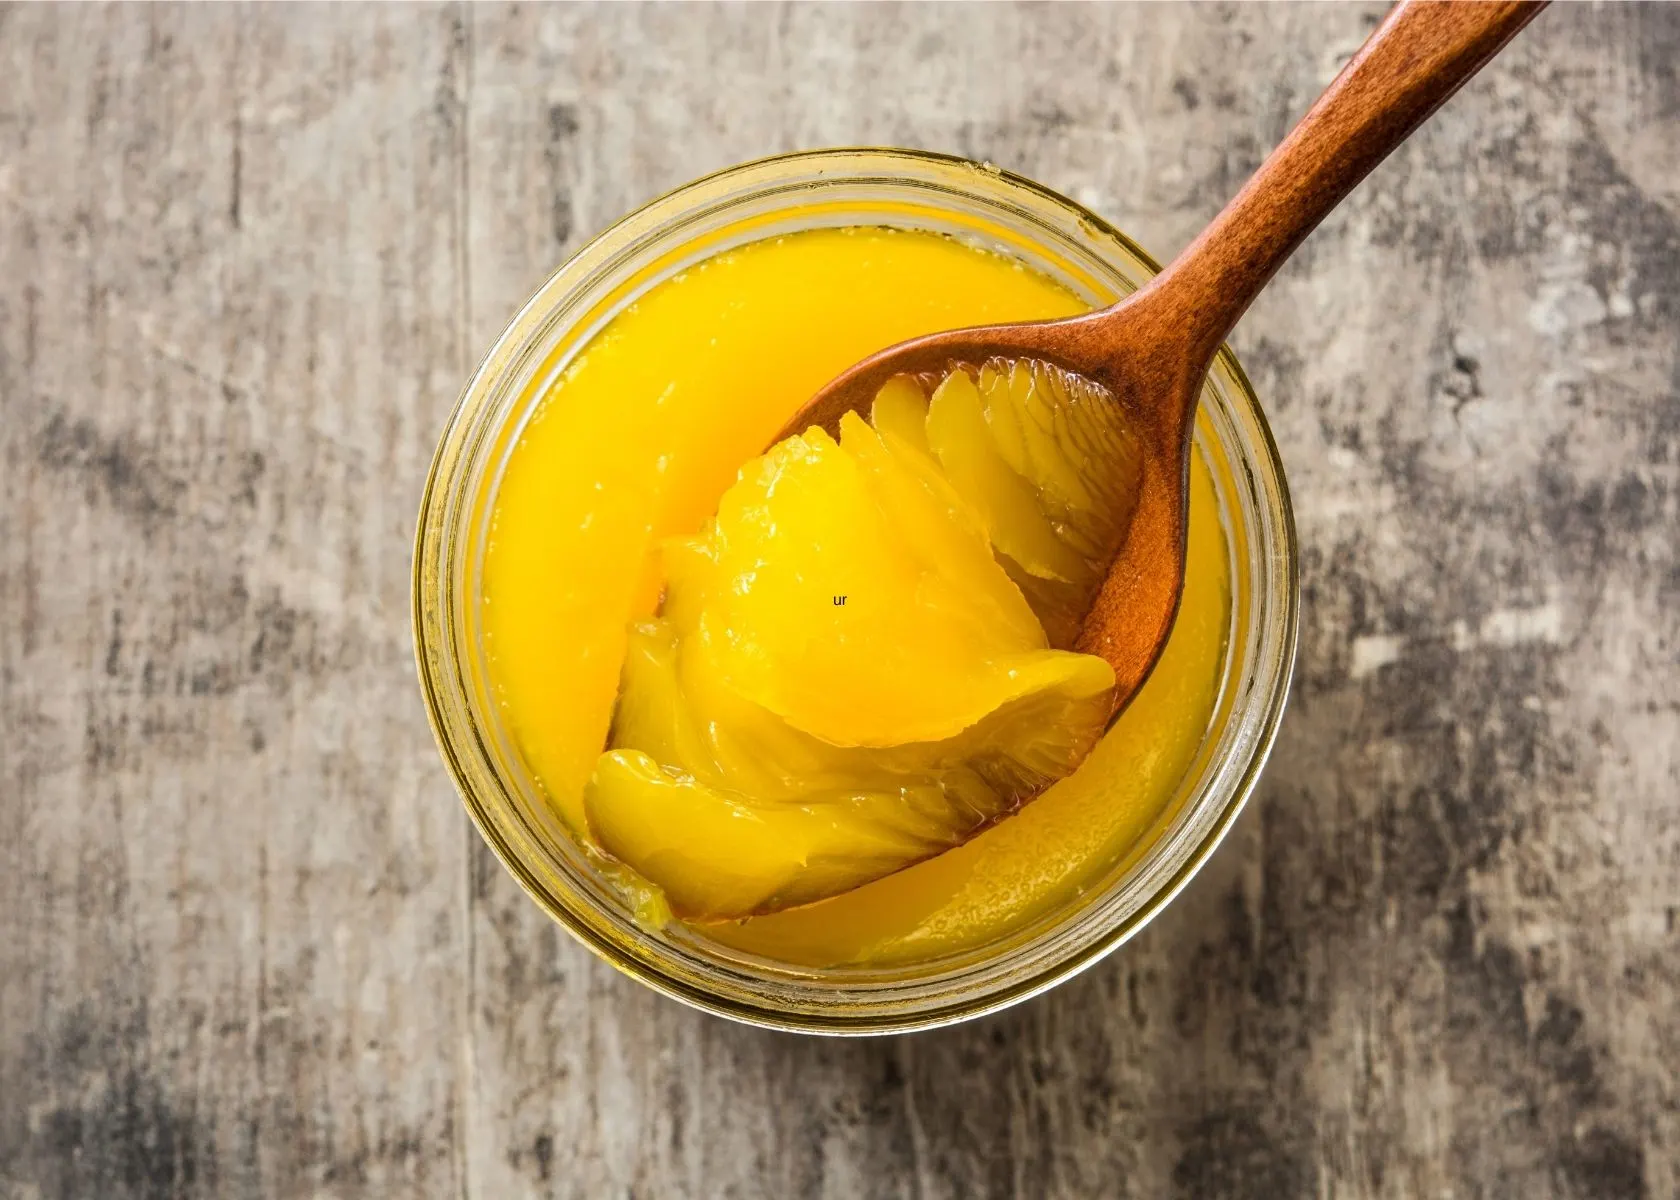 Ghee in clear glass jar with wooden spoon on rustic wooden surface.